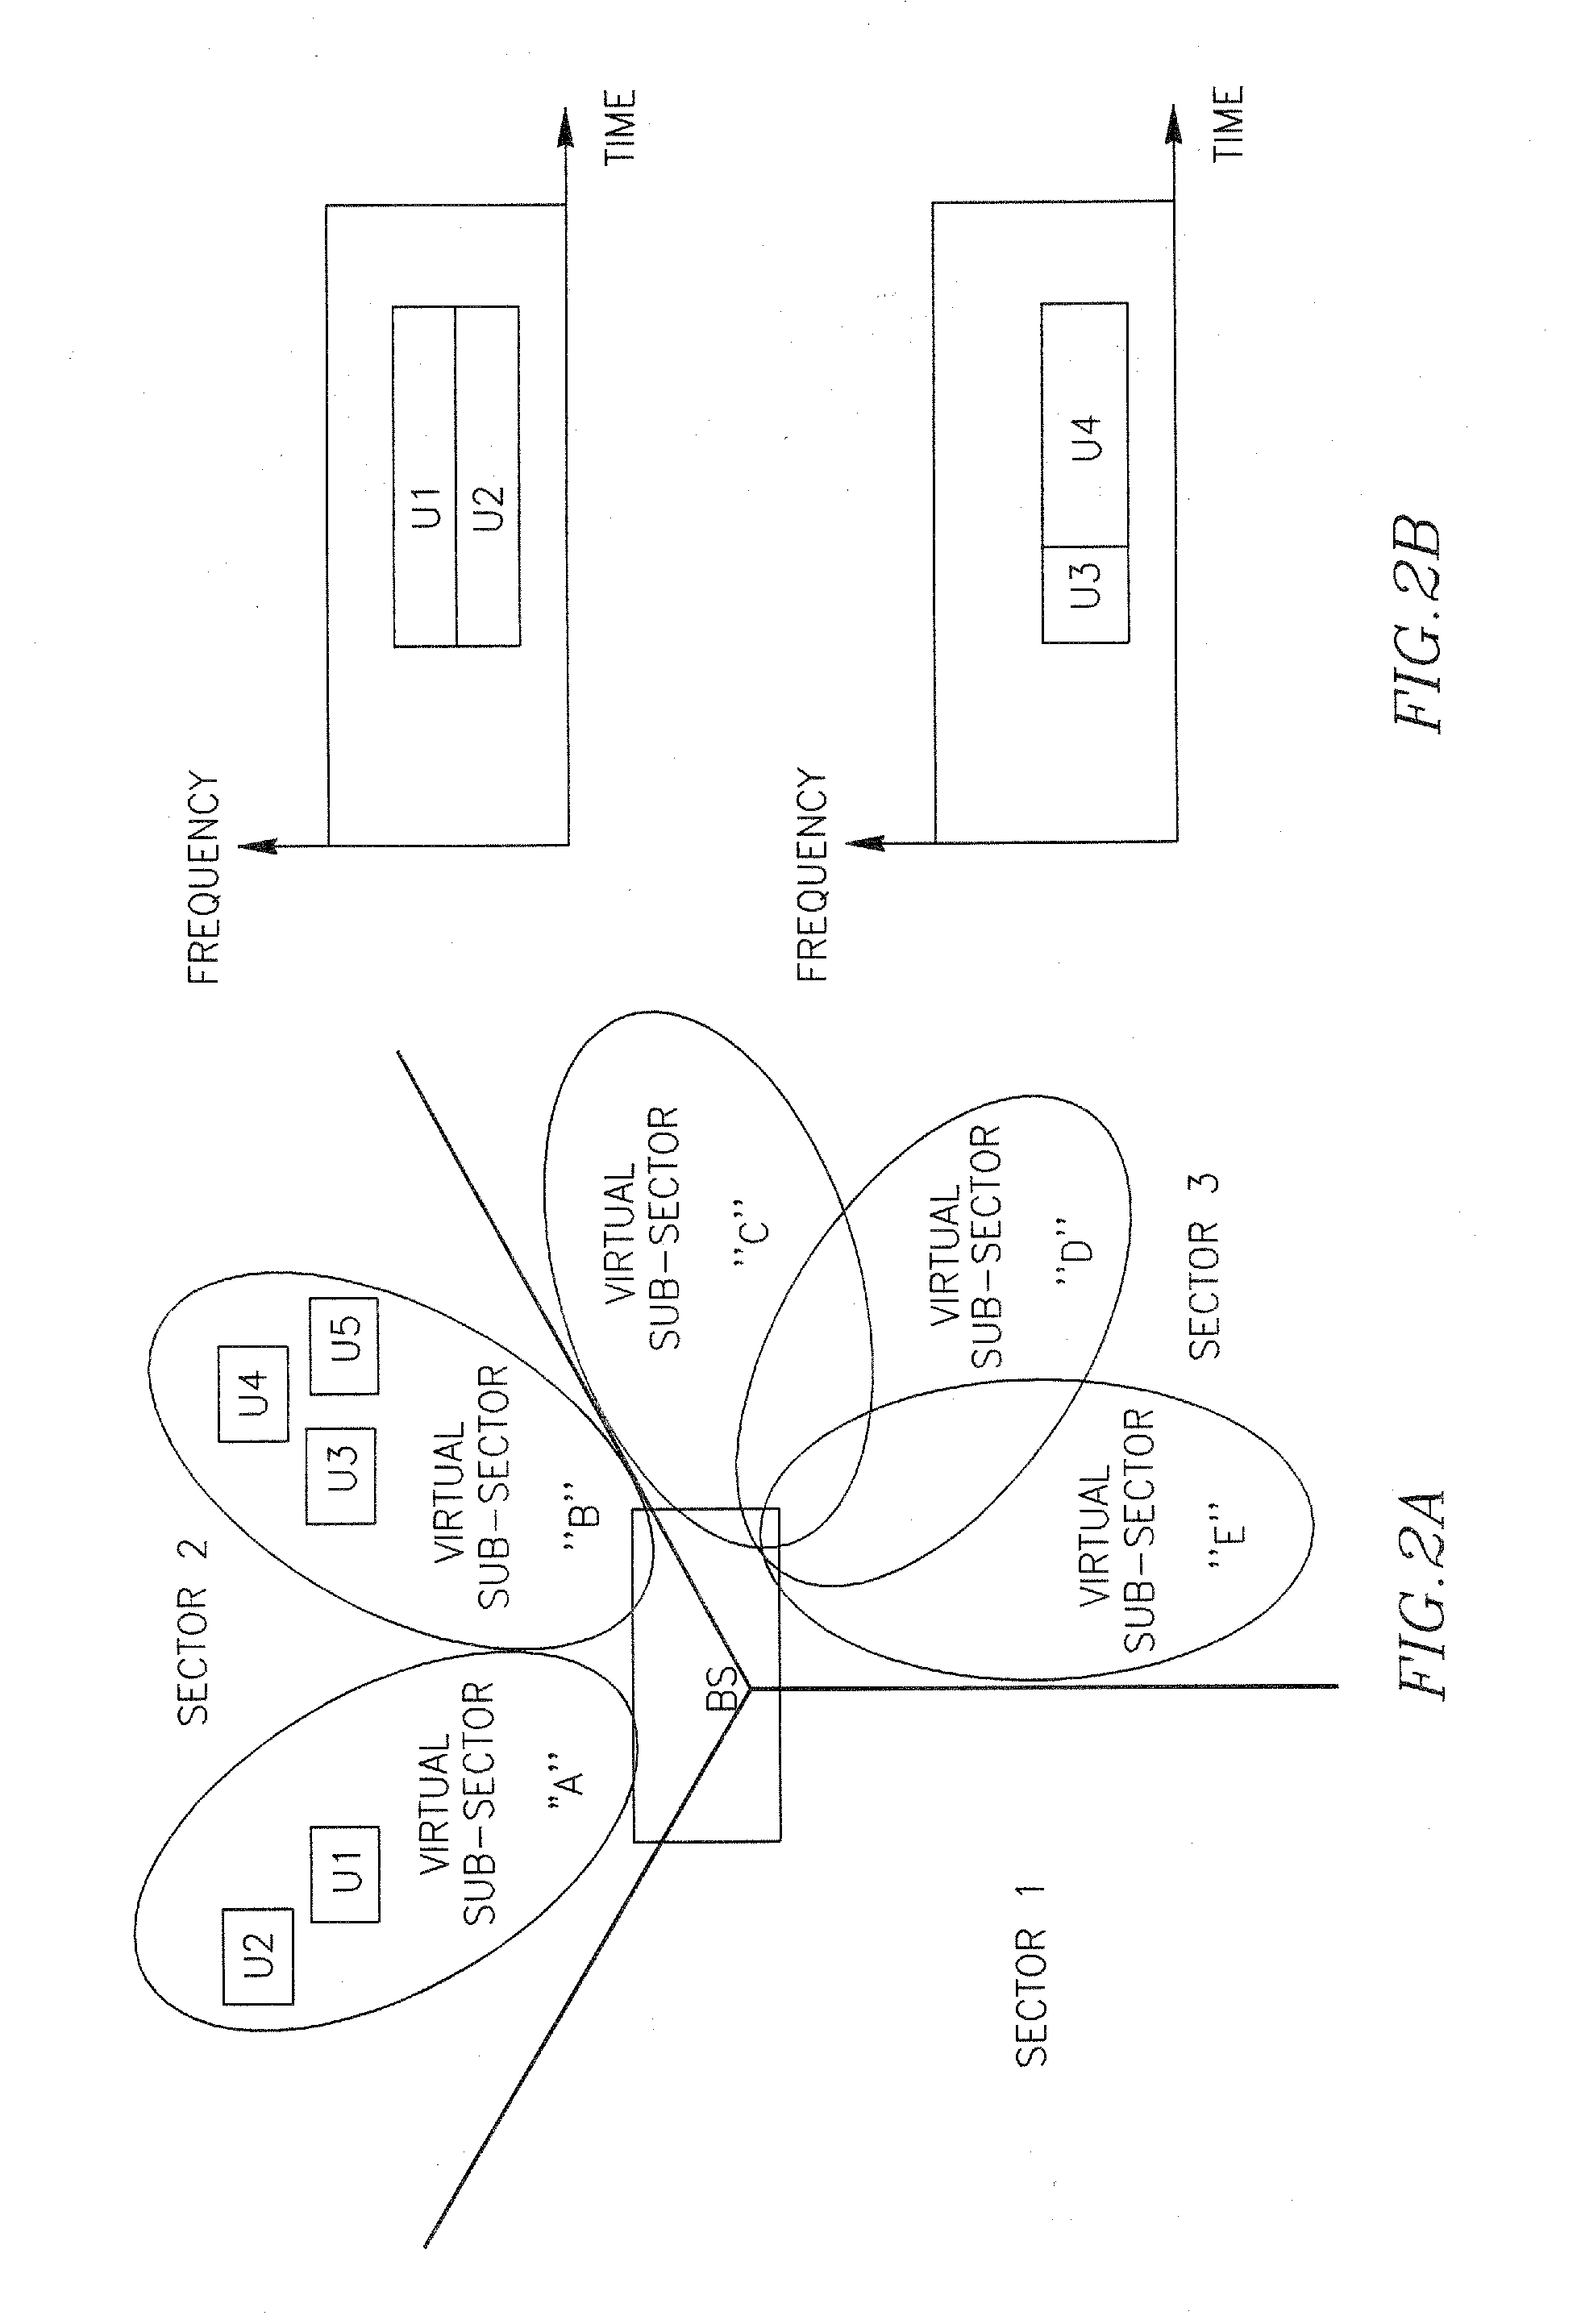 Wireless communications in a multi-sector network